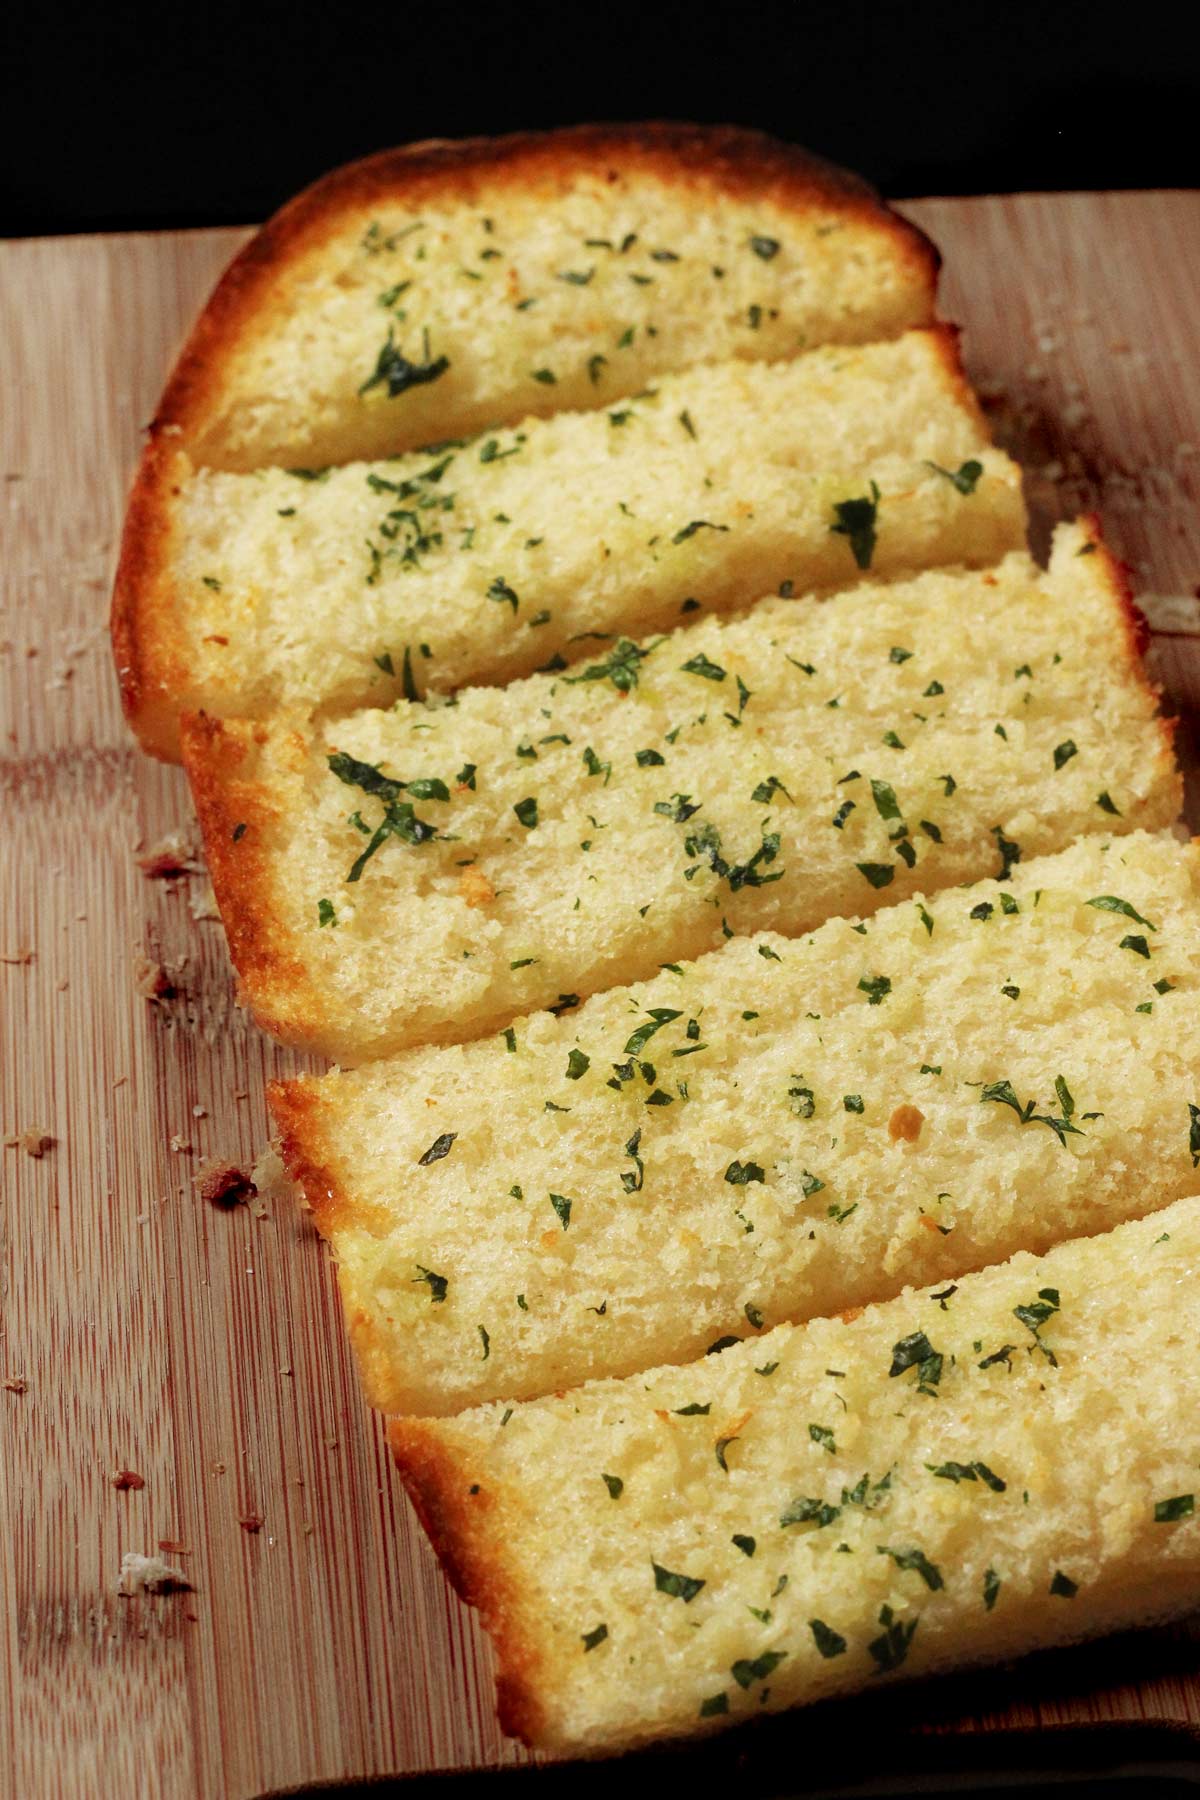 garlic butter melted and baked into a large loaf of sliced garlic bread.